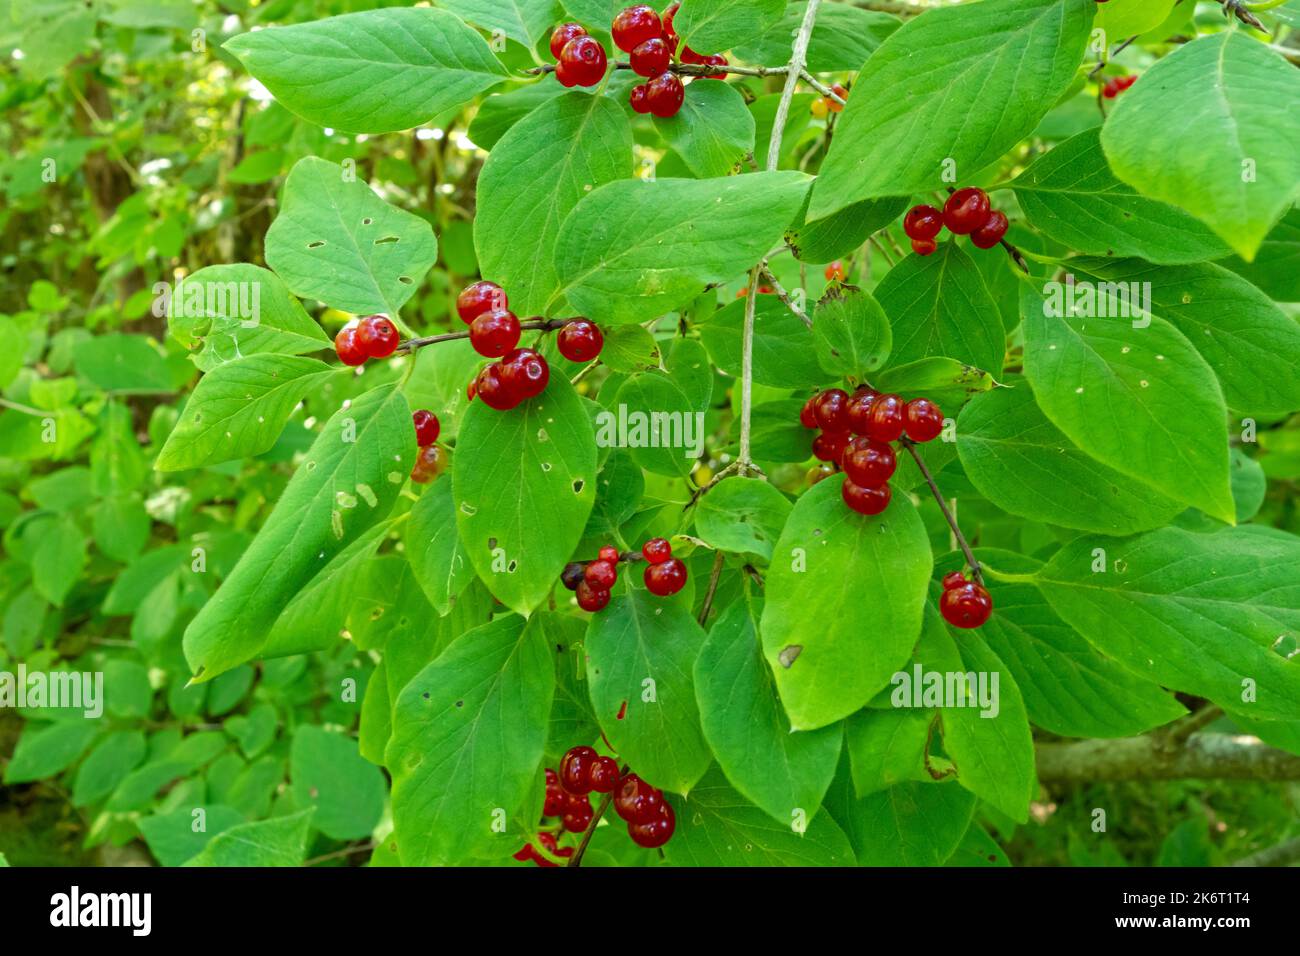 Lonicera xylosteum close-up - a poisonous wild plant with dangerous fruits Stock Photo